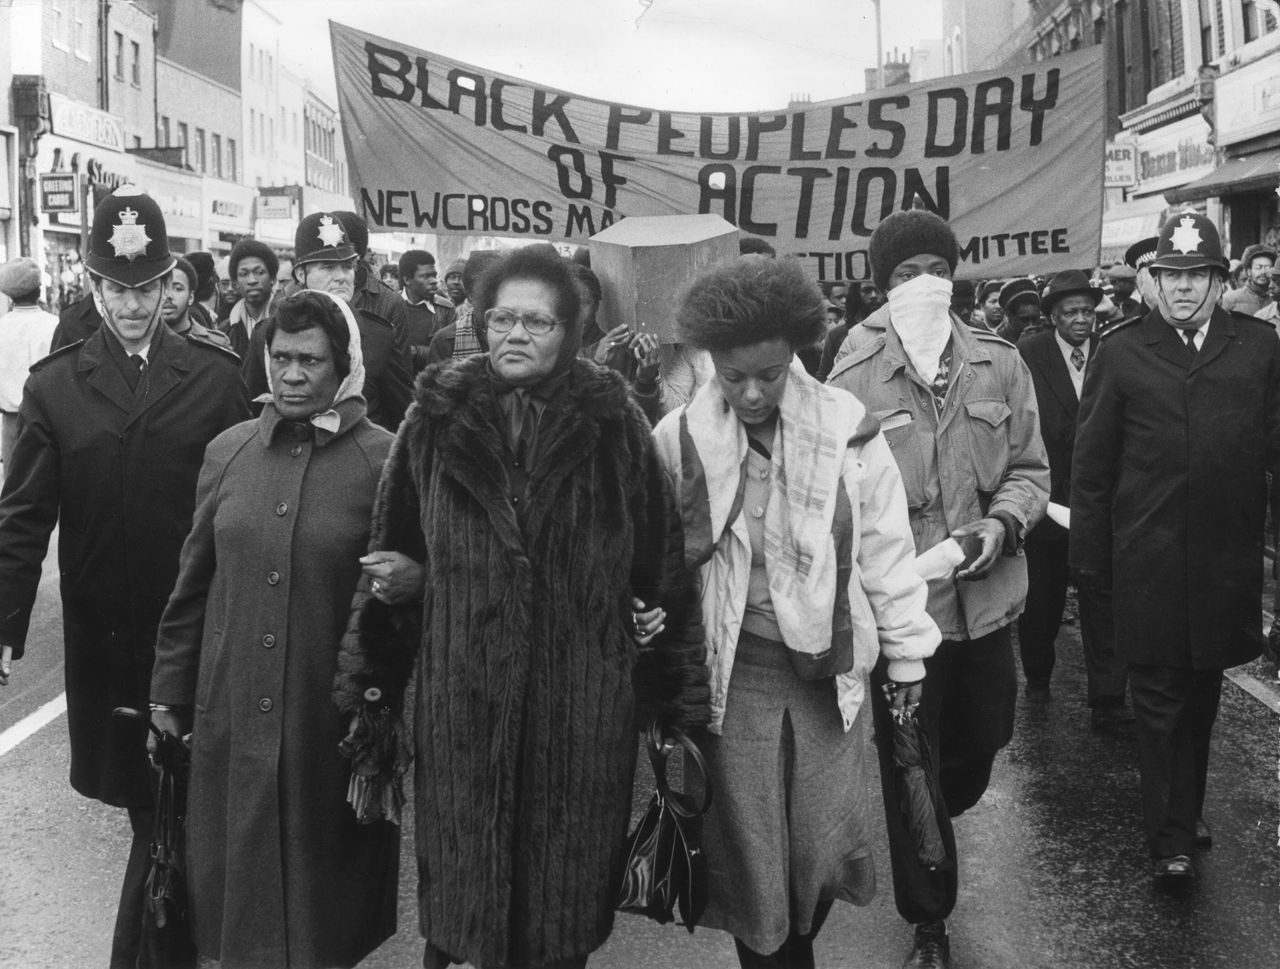 March 2, 1981: Grieving protesters march from New Cross to the House of Commons after 13 Black people were killed in the New Year fire at Deptford, south London